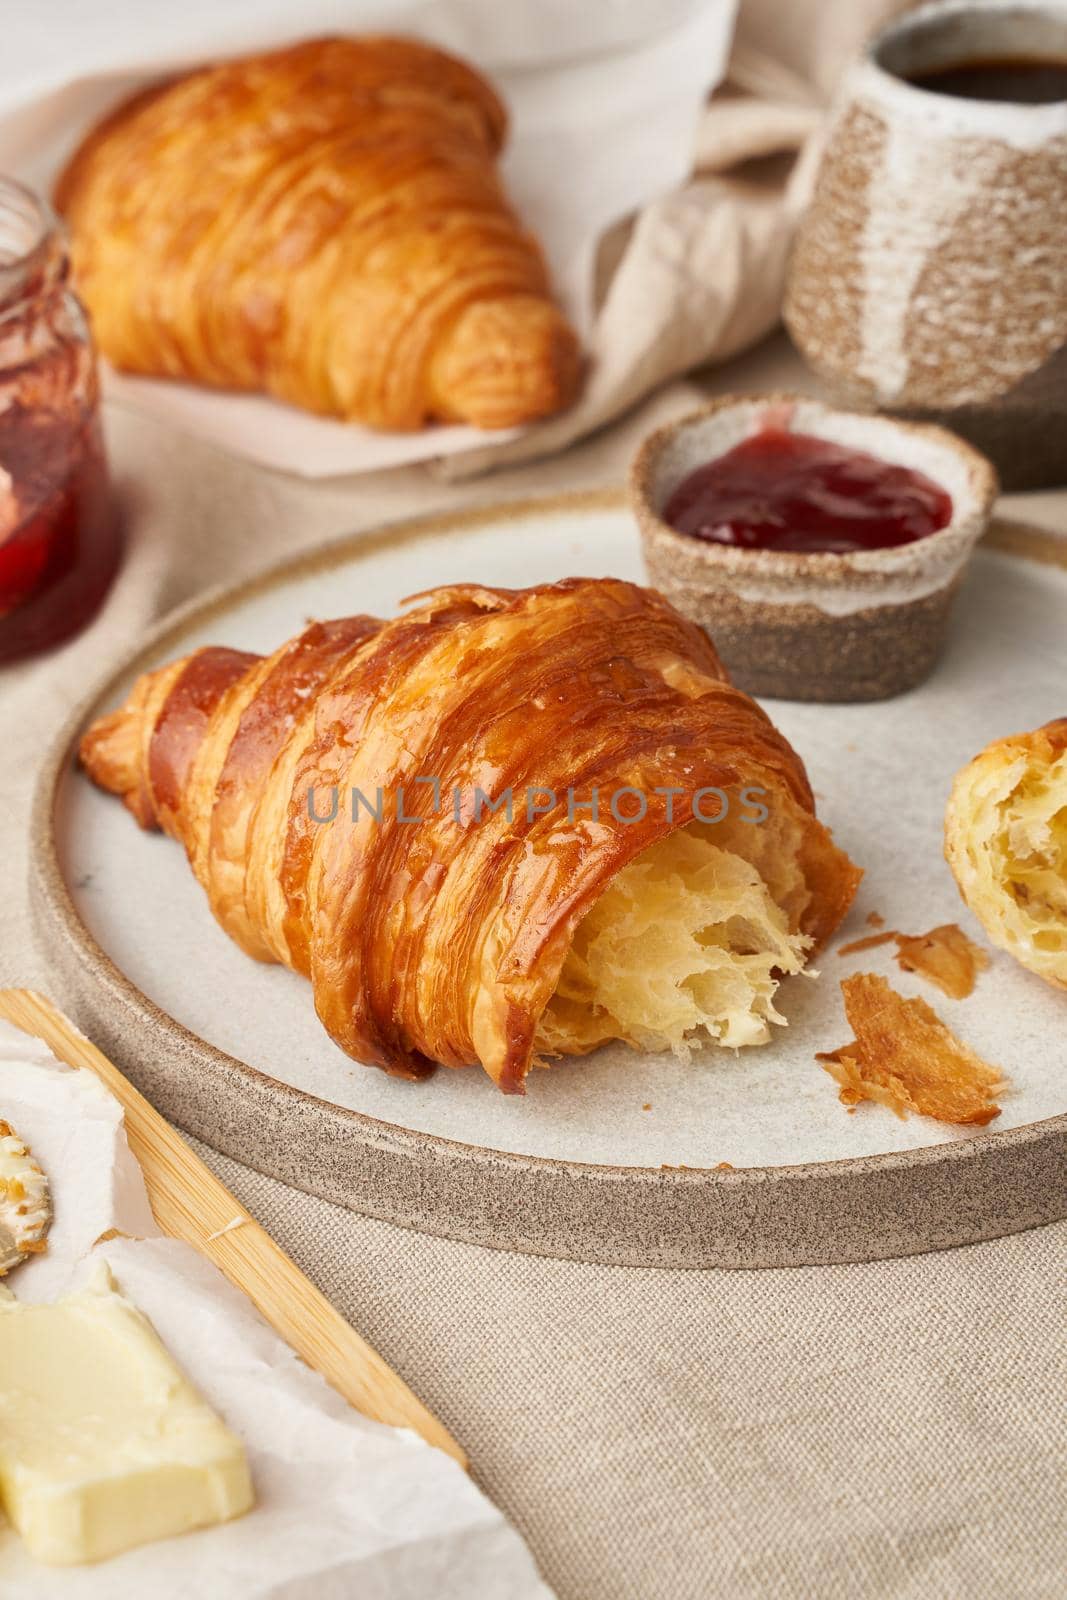 Two delicious croissants on plate and hot drink in mug, side view, vertical by NataBene